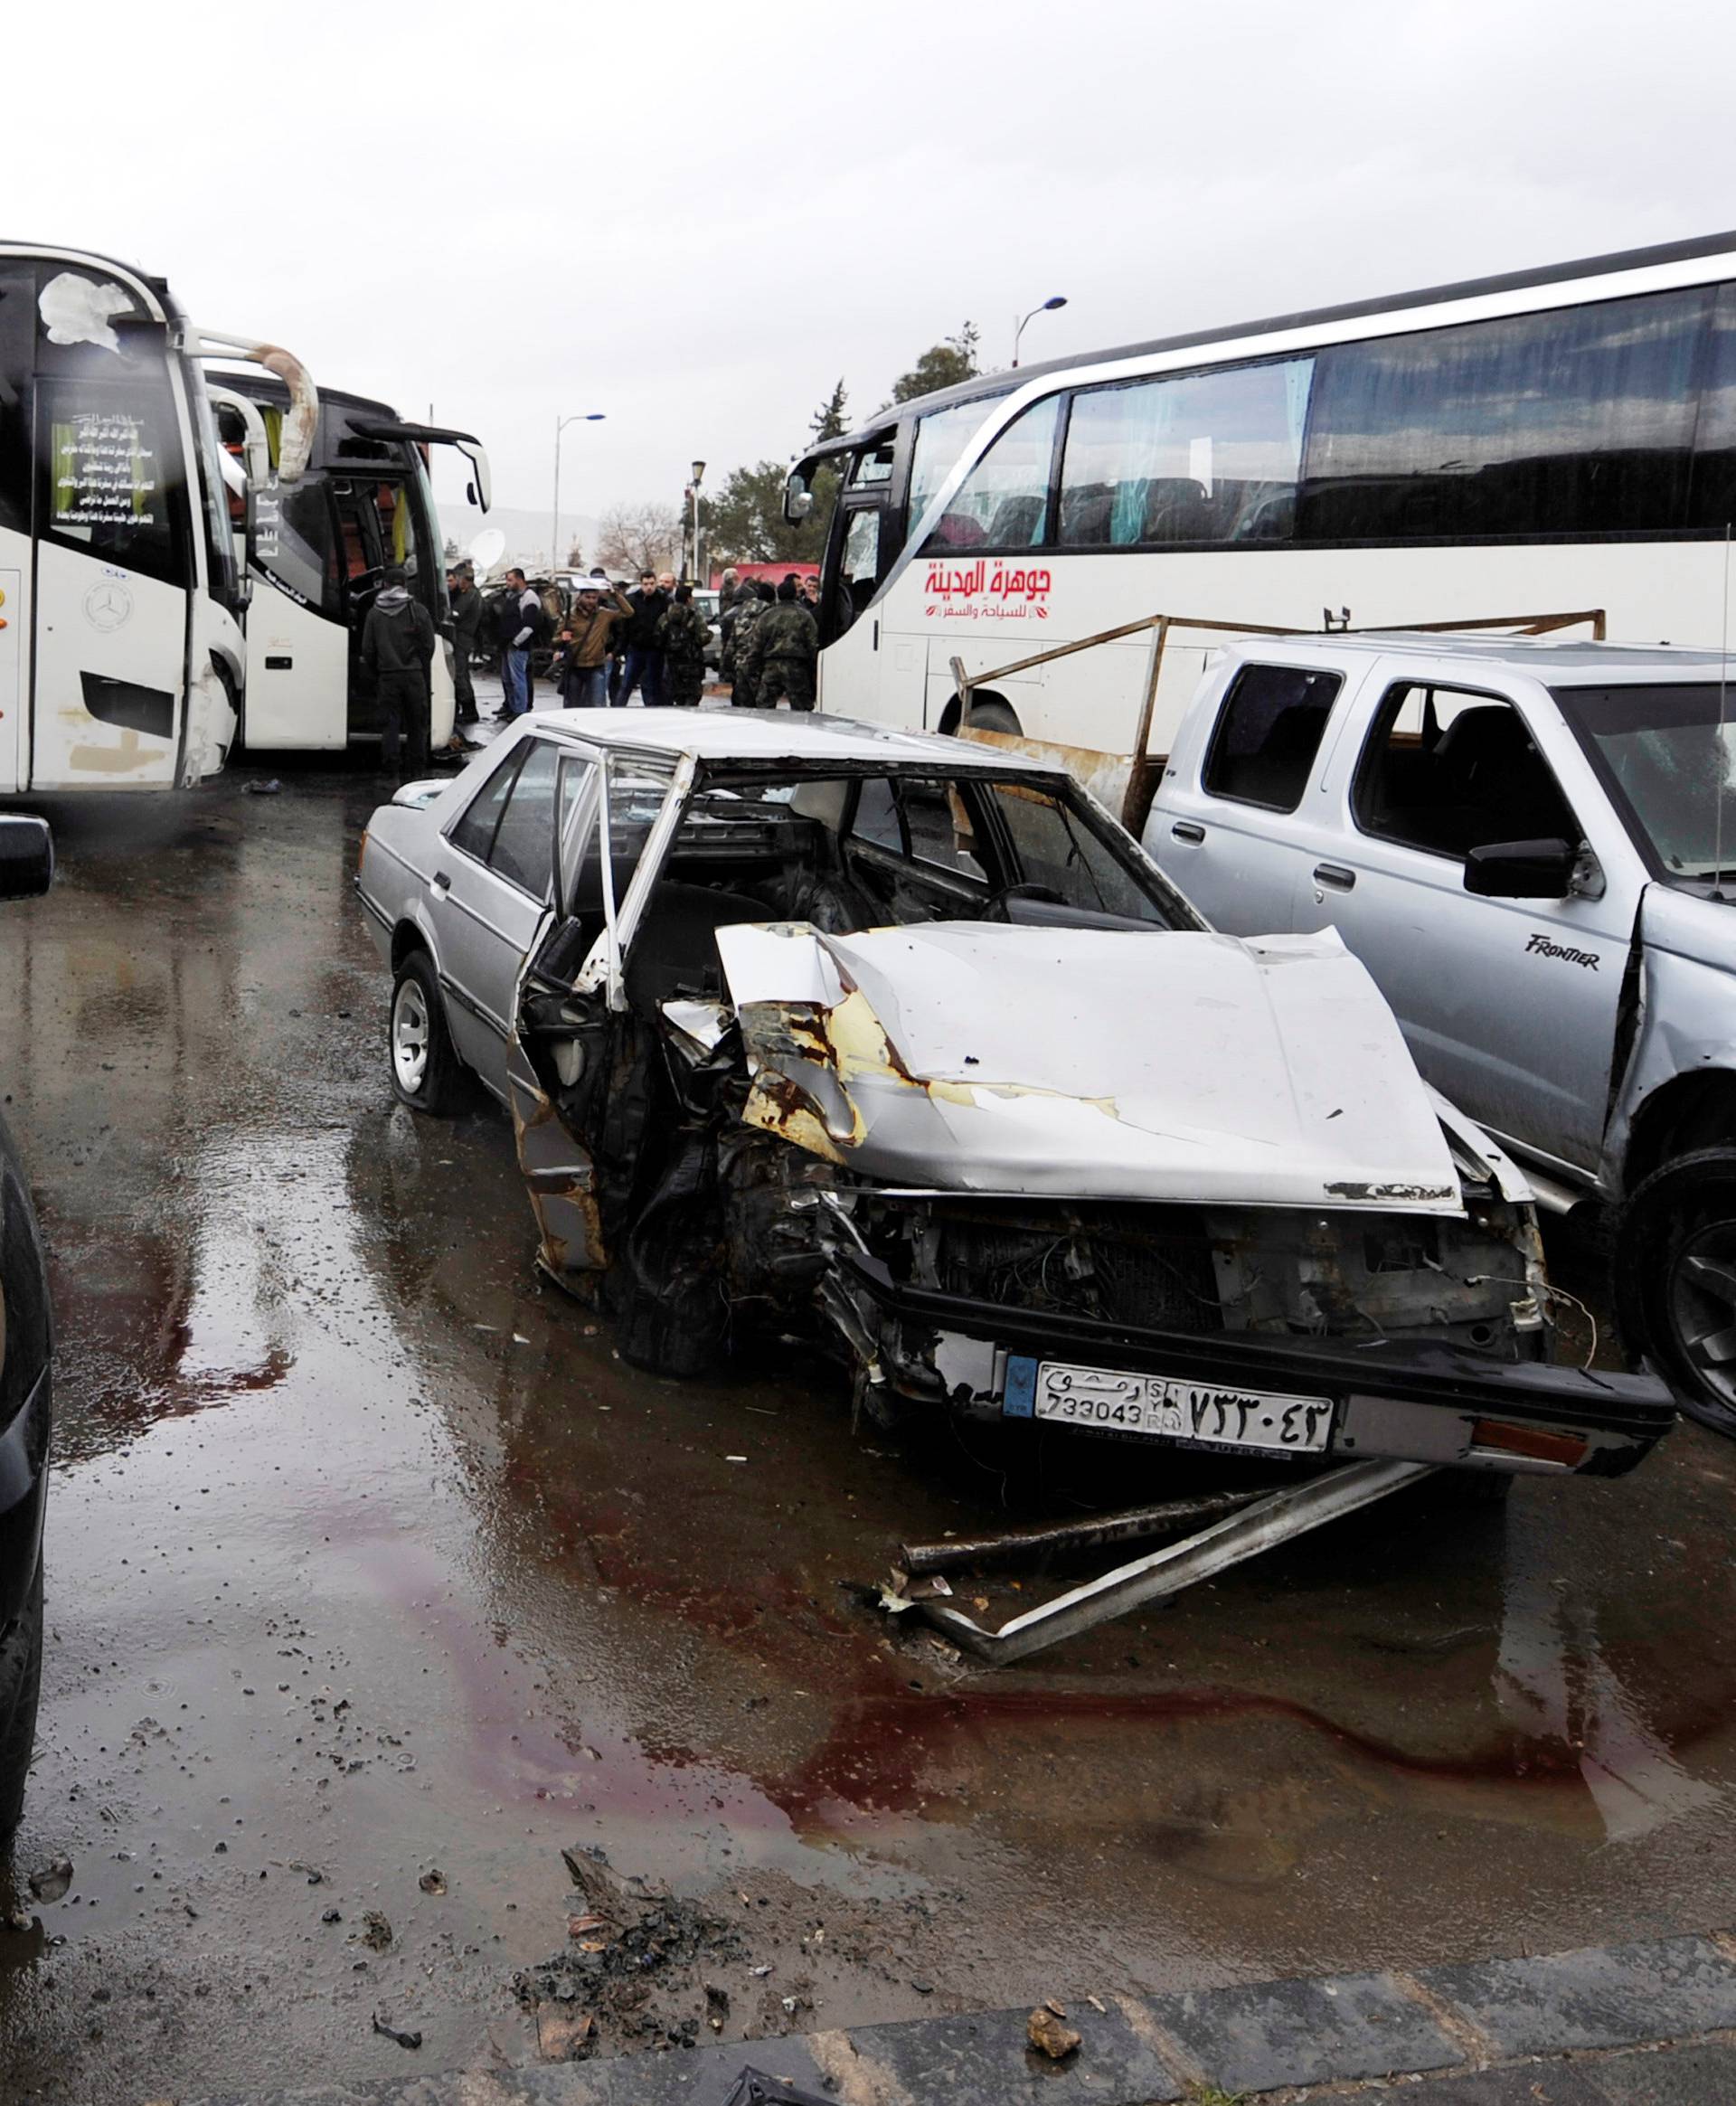 Damaged vehicles are pictured at the site of an attack by two suicide bombers in Damascus